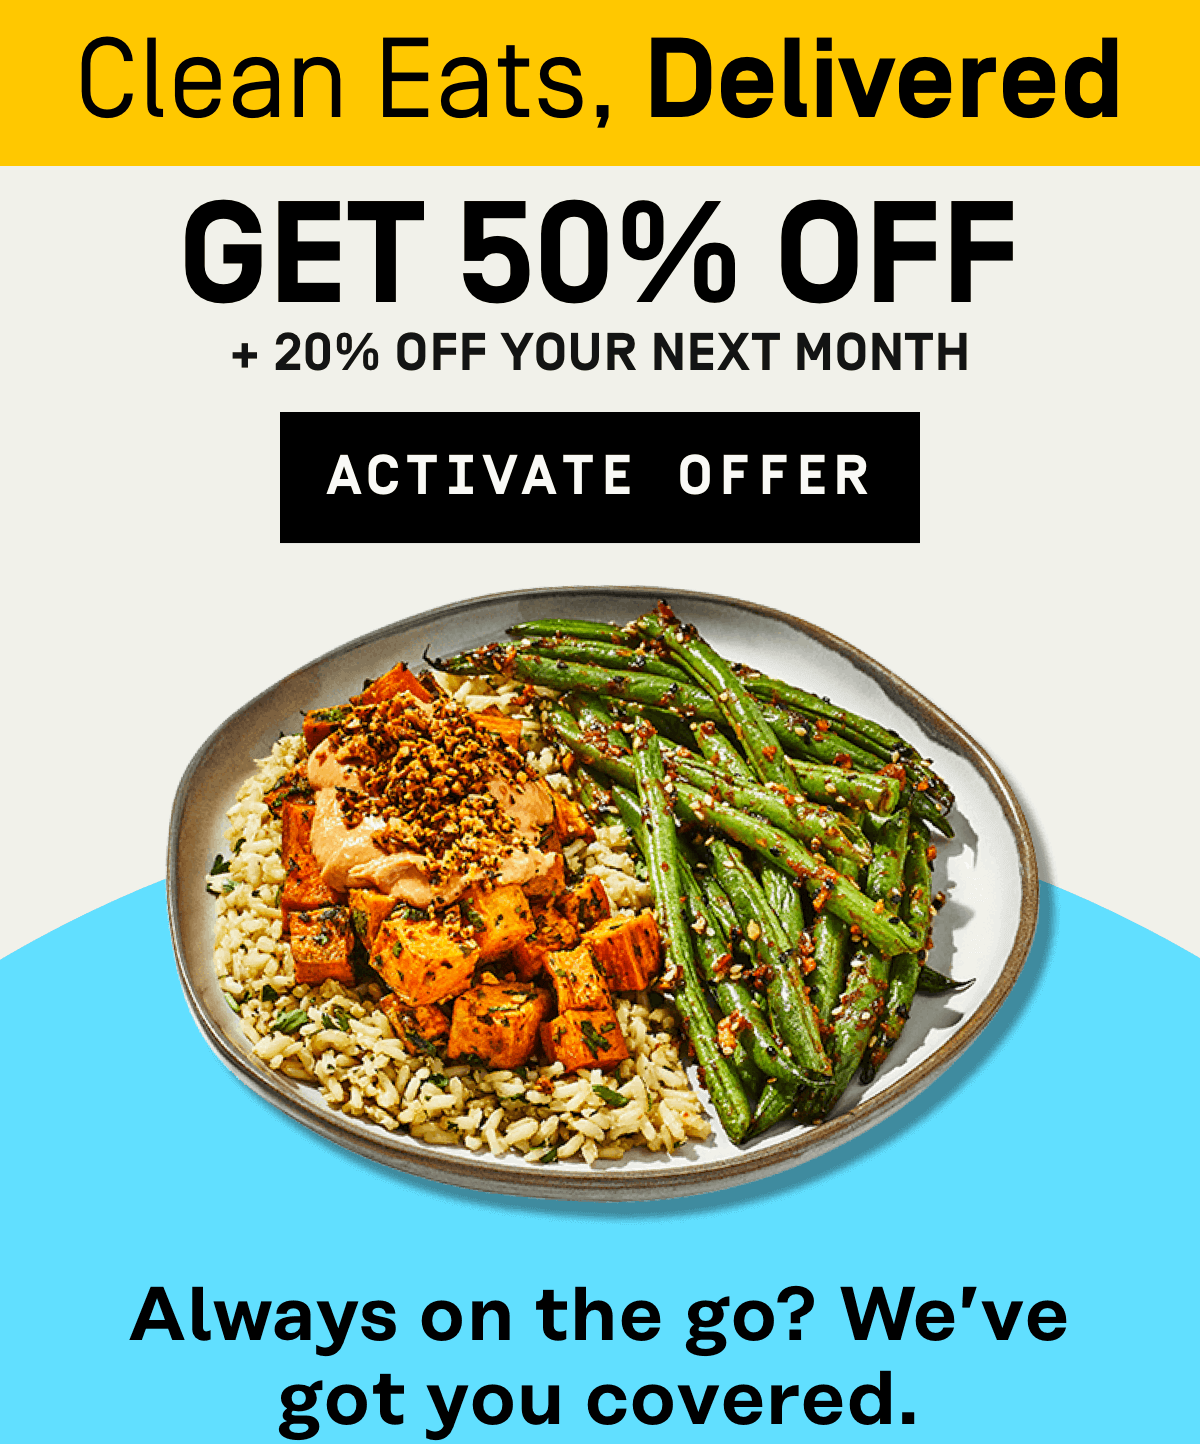 Clean eats, delivered! Get 50% Off + 20% Off your next month | Activate Offer 